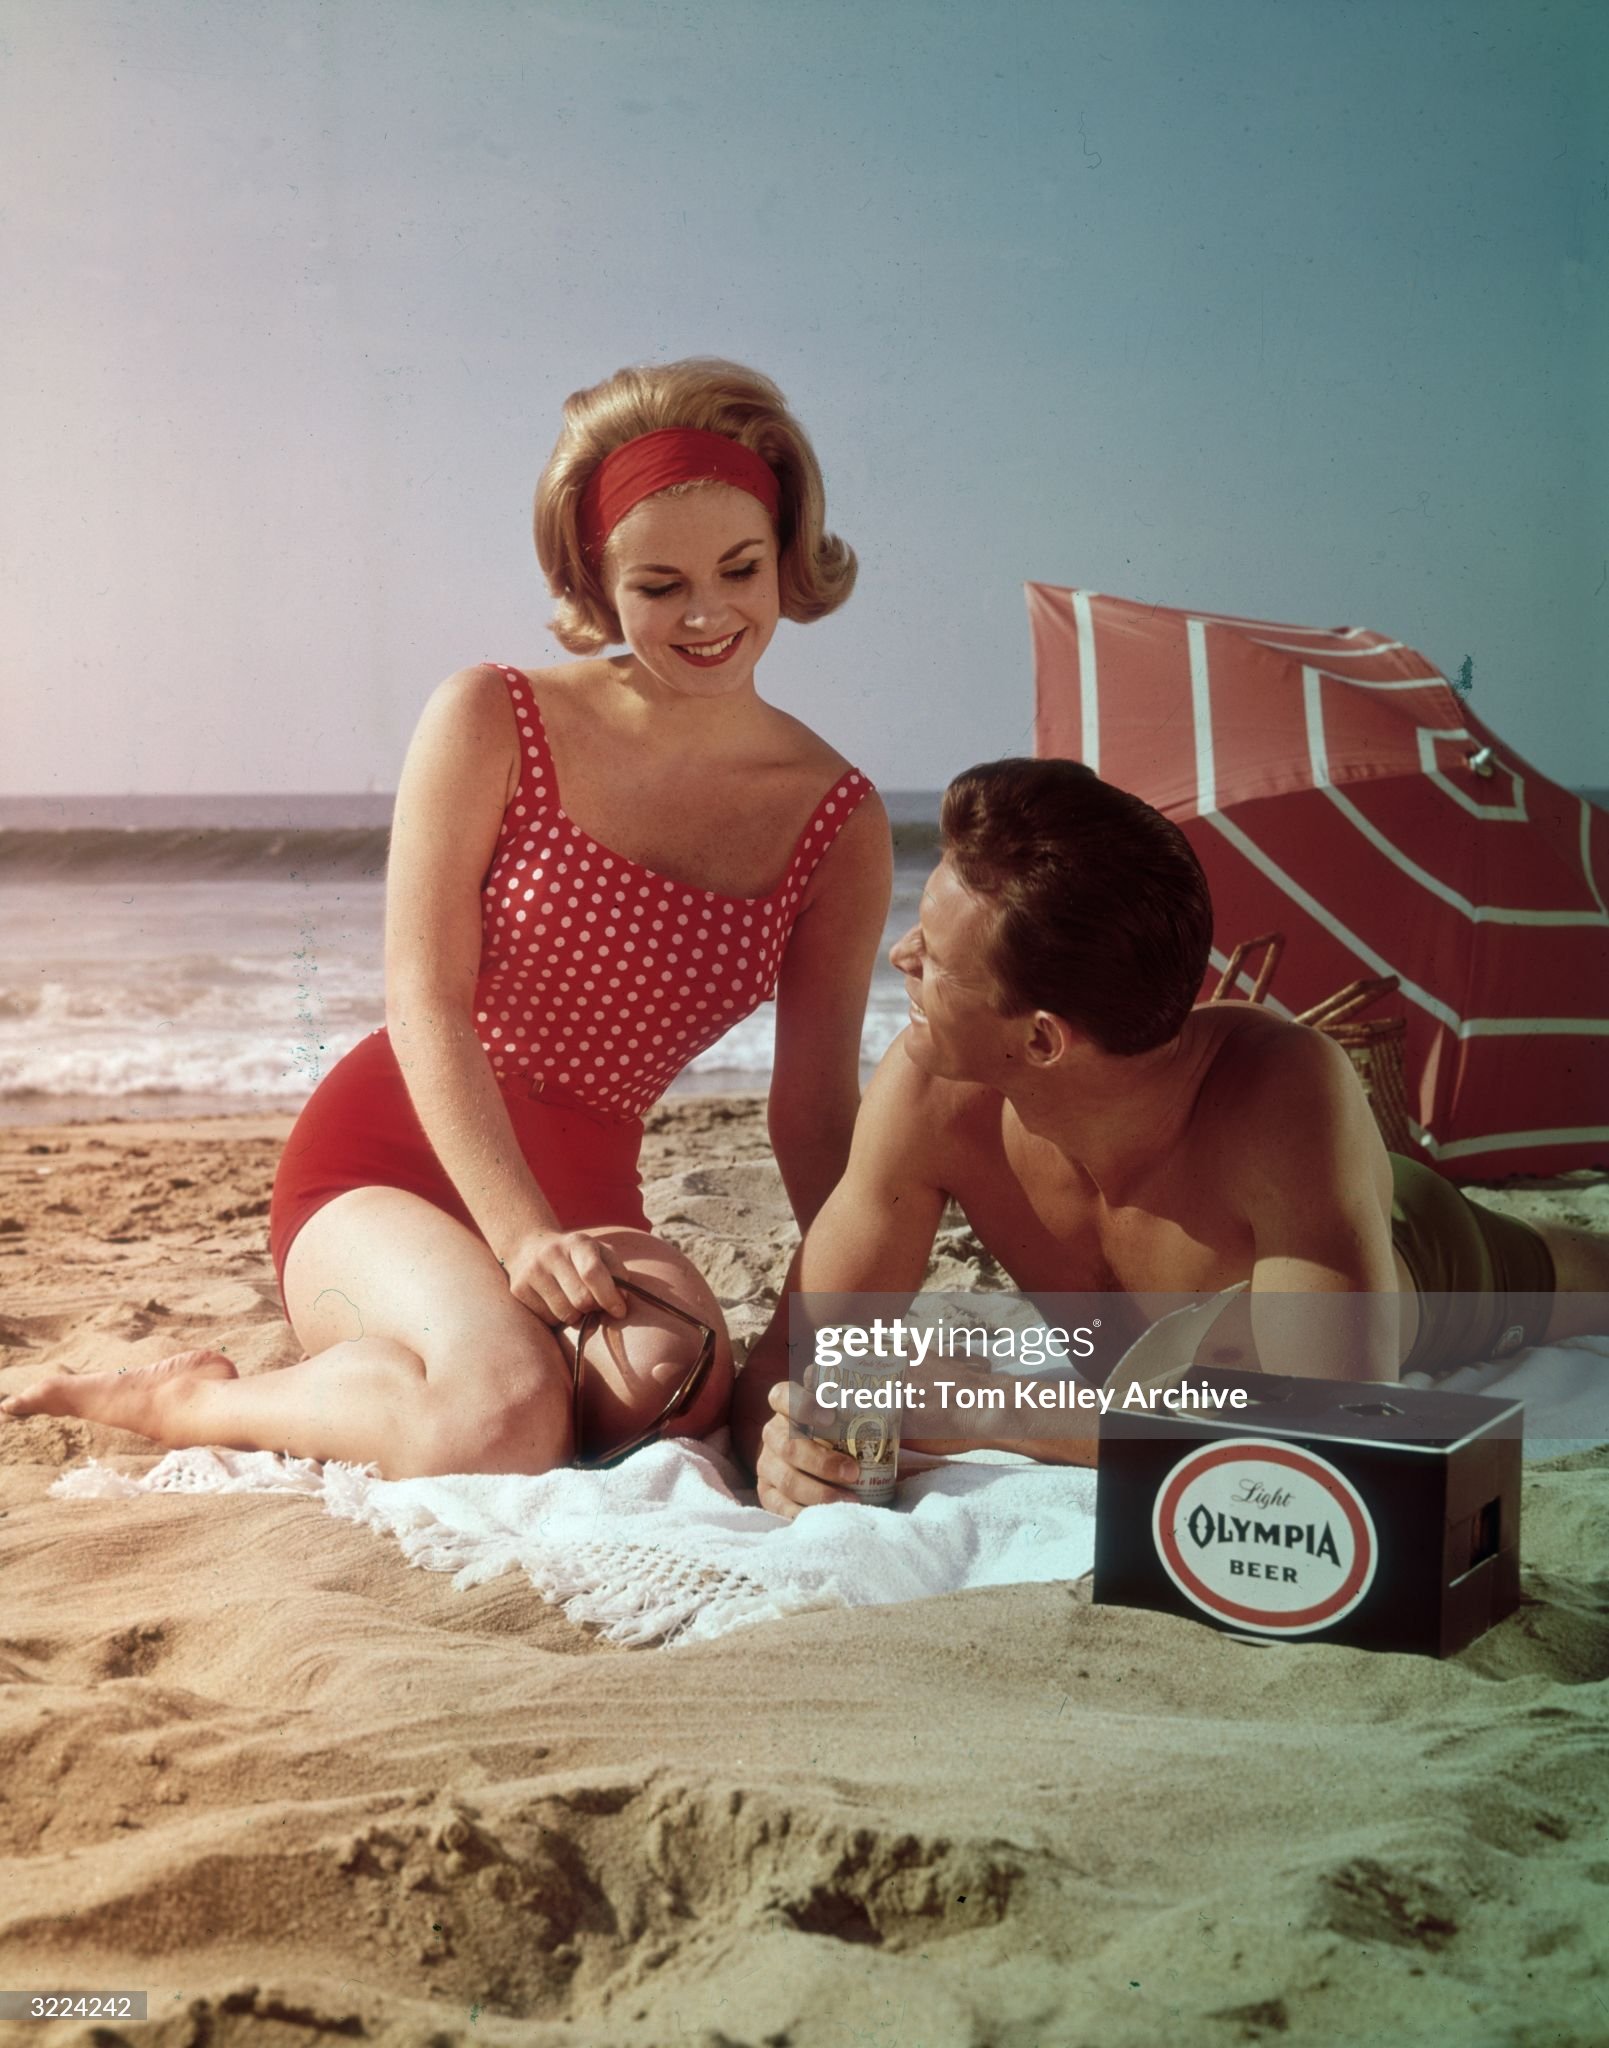 Circa 1960. A young couple in bathing suits pose next to a case of beer on a beach in an advertisement for Light Olympia Beer. 